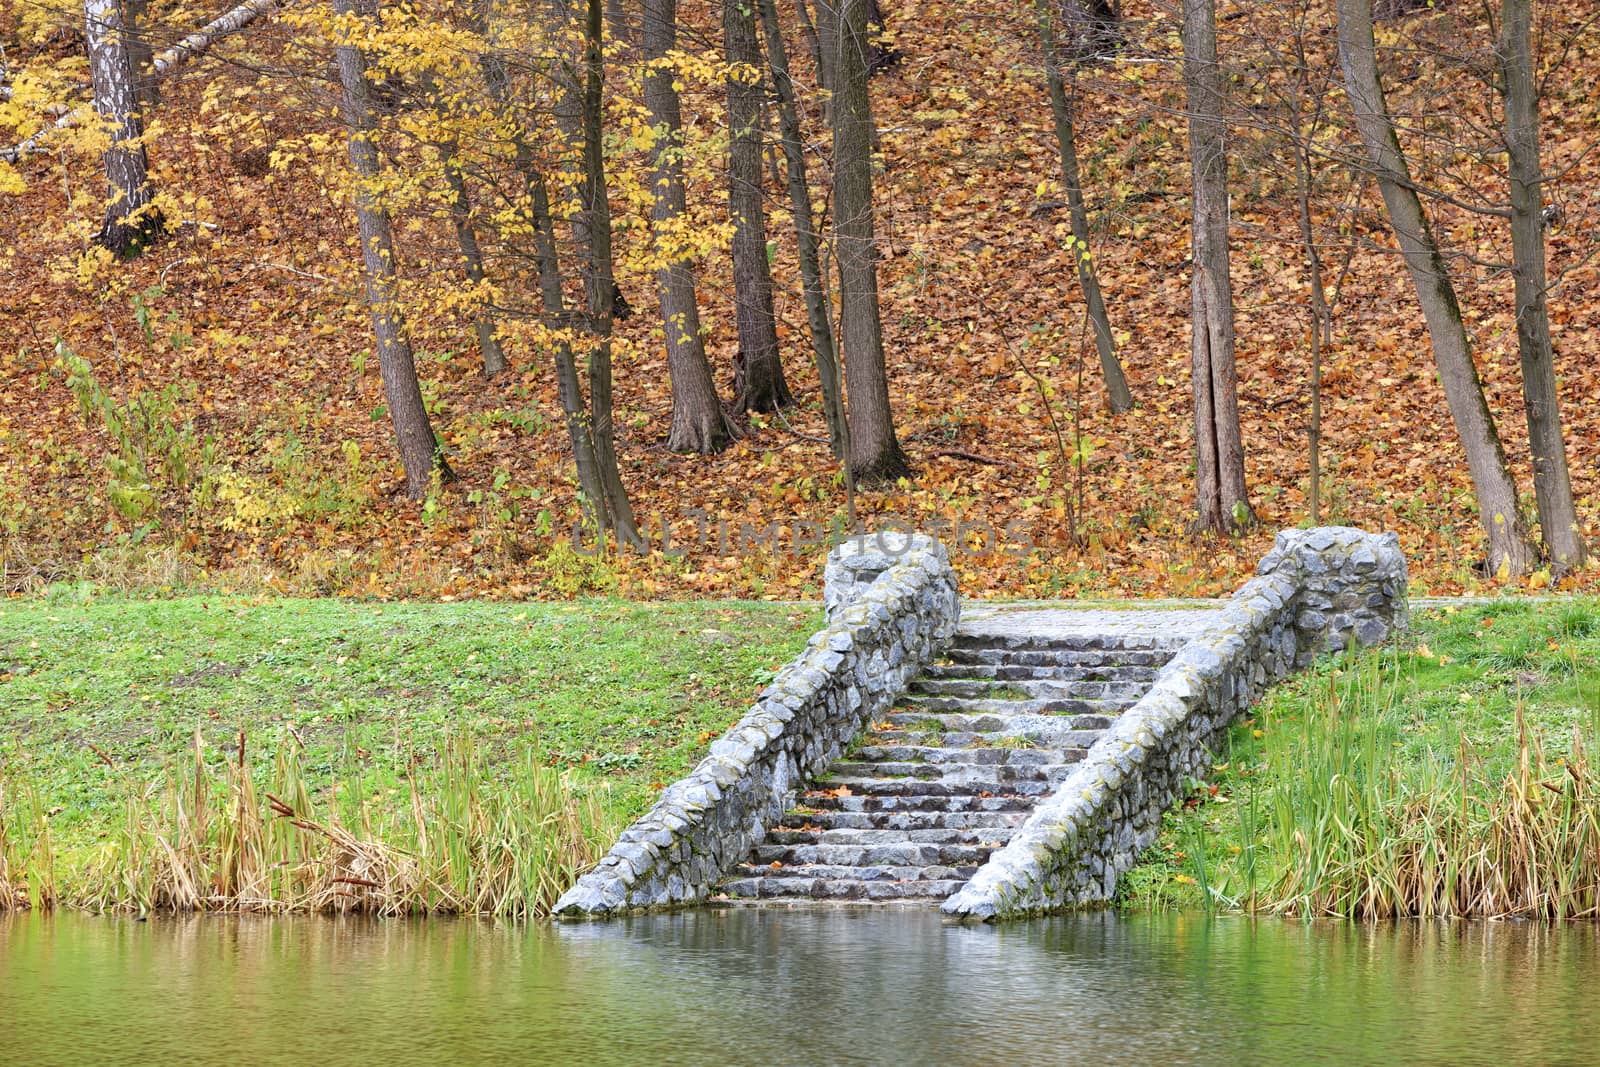 On the shore of the autumn forest pond, the old, moss-covered, stone steps touch the calm surface of the water.